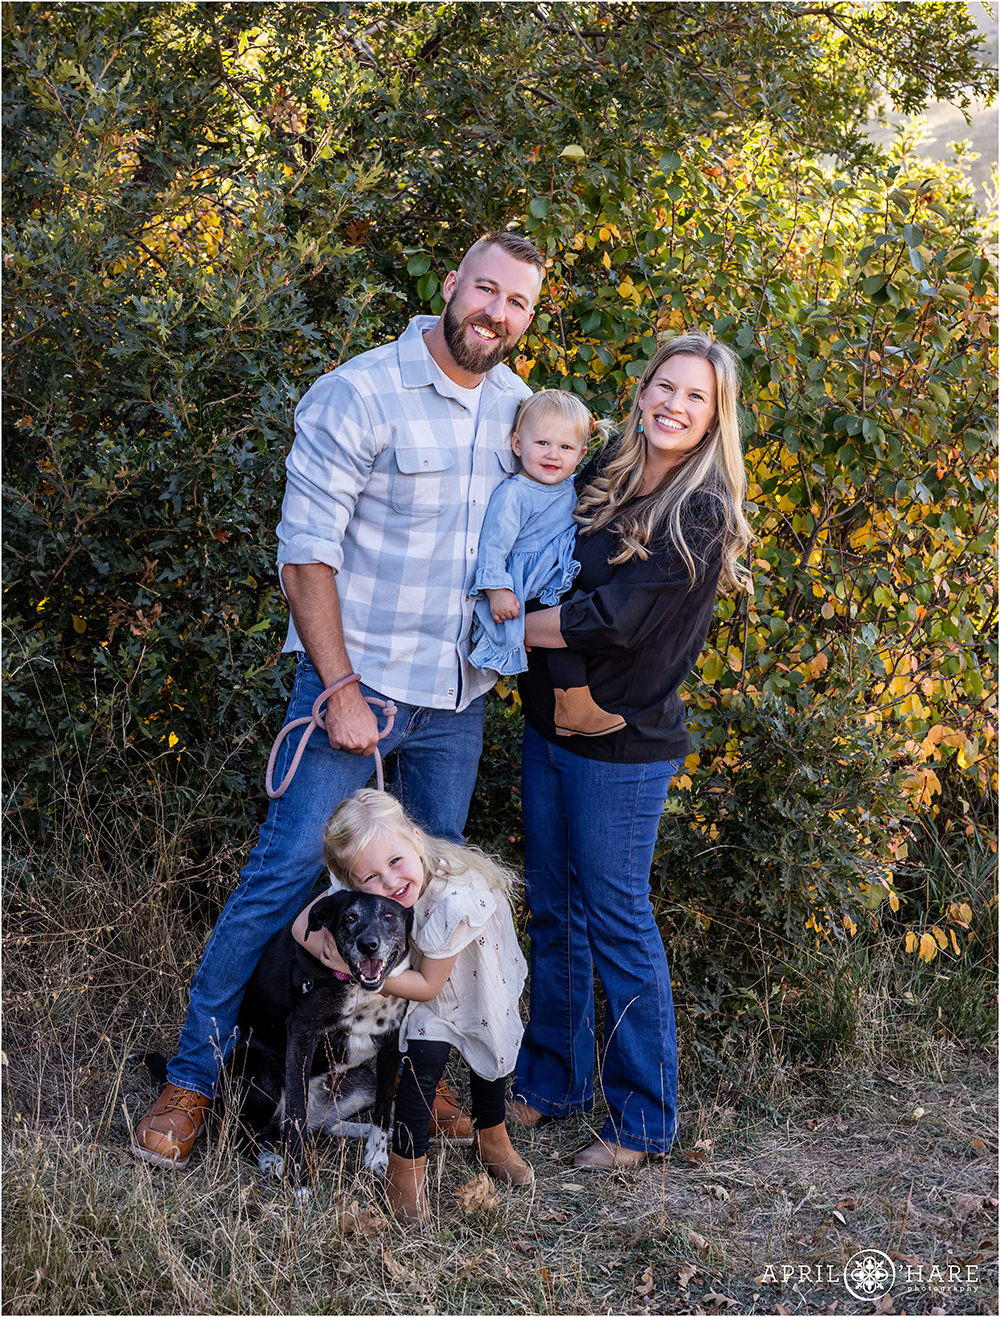 Adorable family with two little girls and a sweet dog at South Valley Park in Littleton Colorado